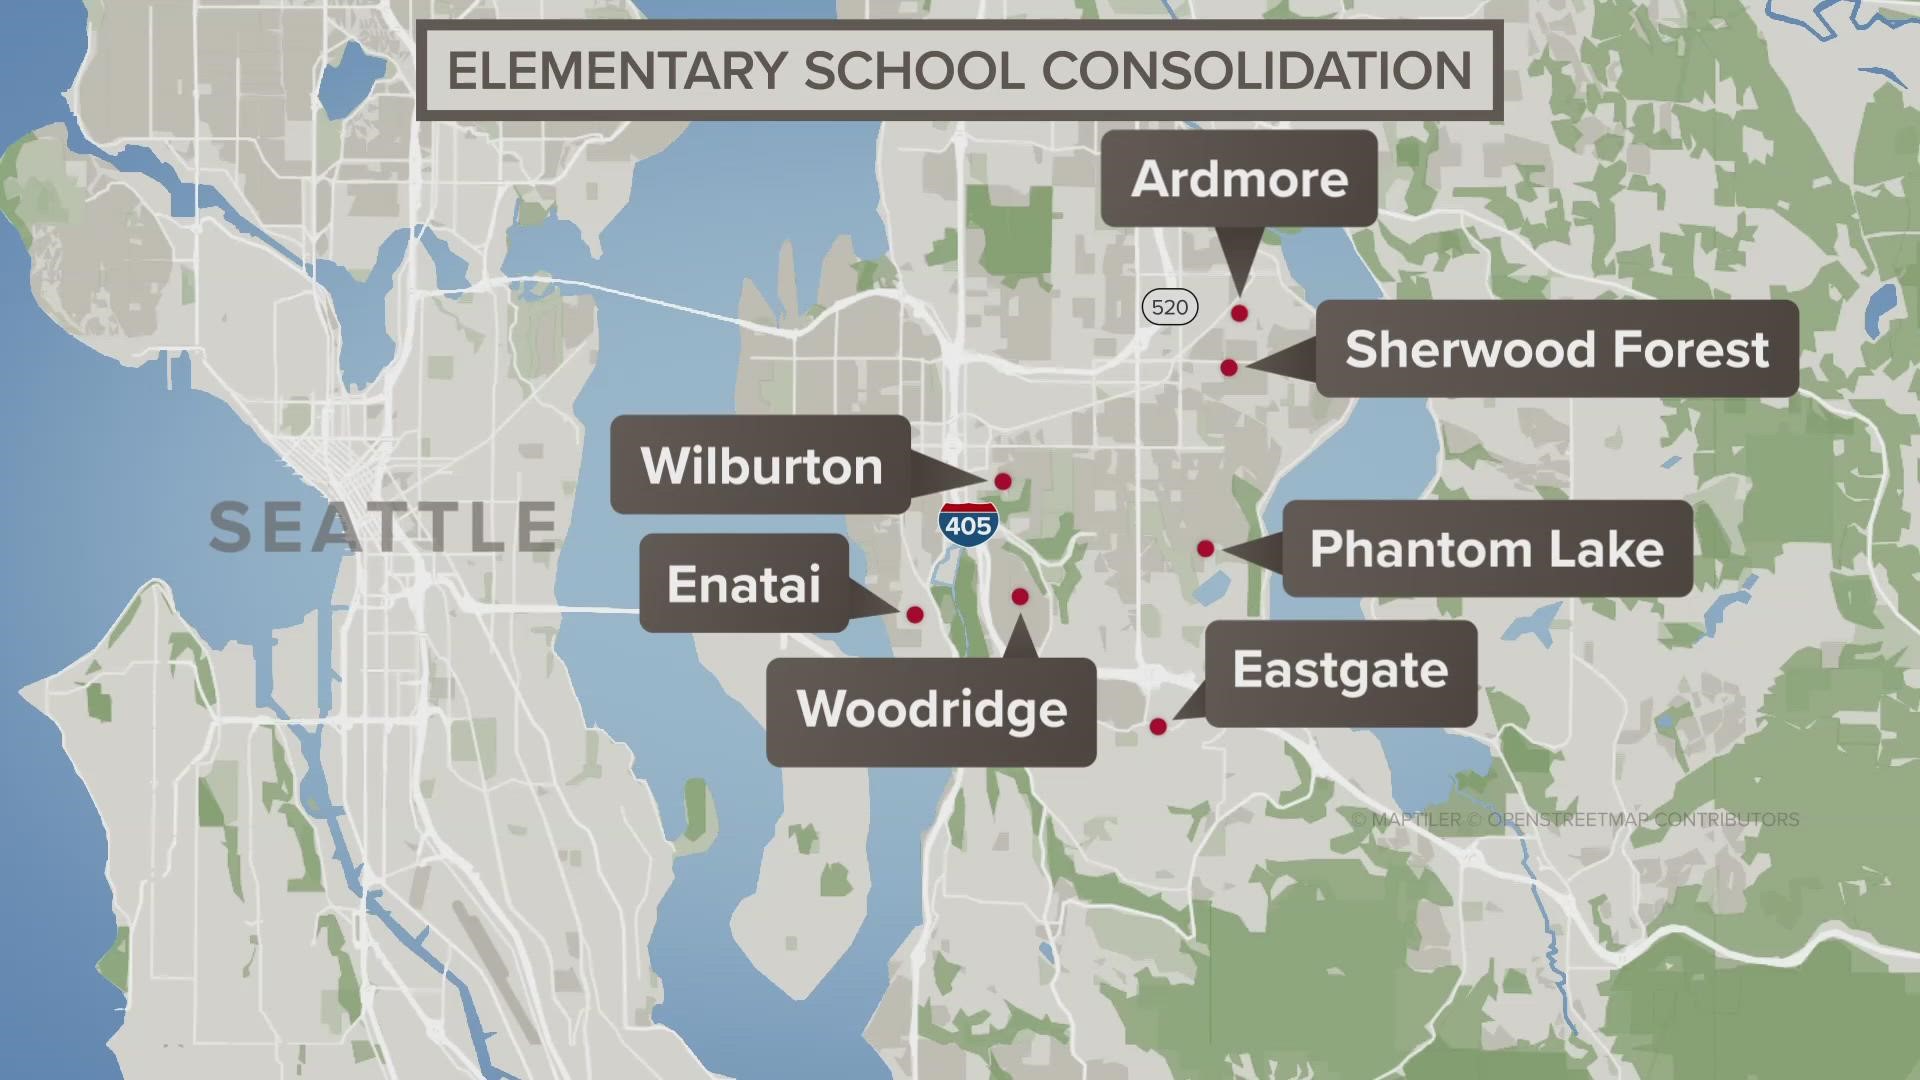 Hundreds of students could be affected as the city of Bellevue considers consolidating three of its seven elementary schools due to low enrollment numbers